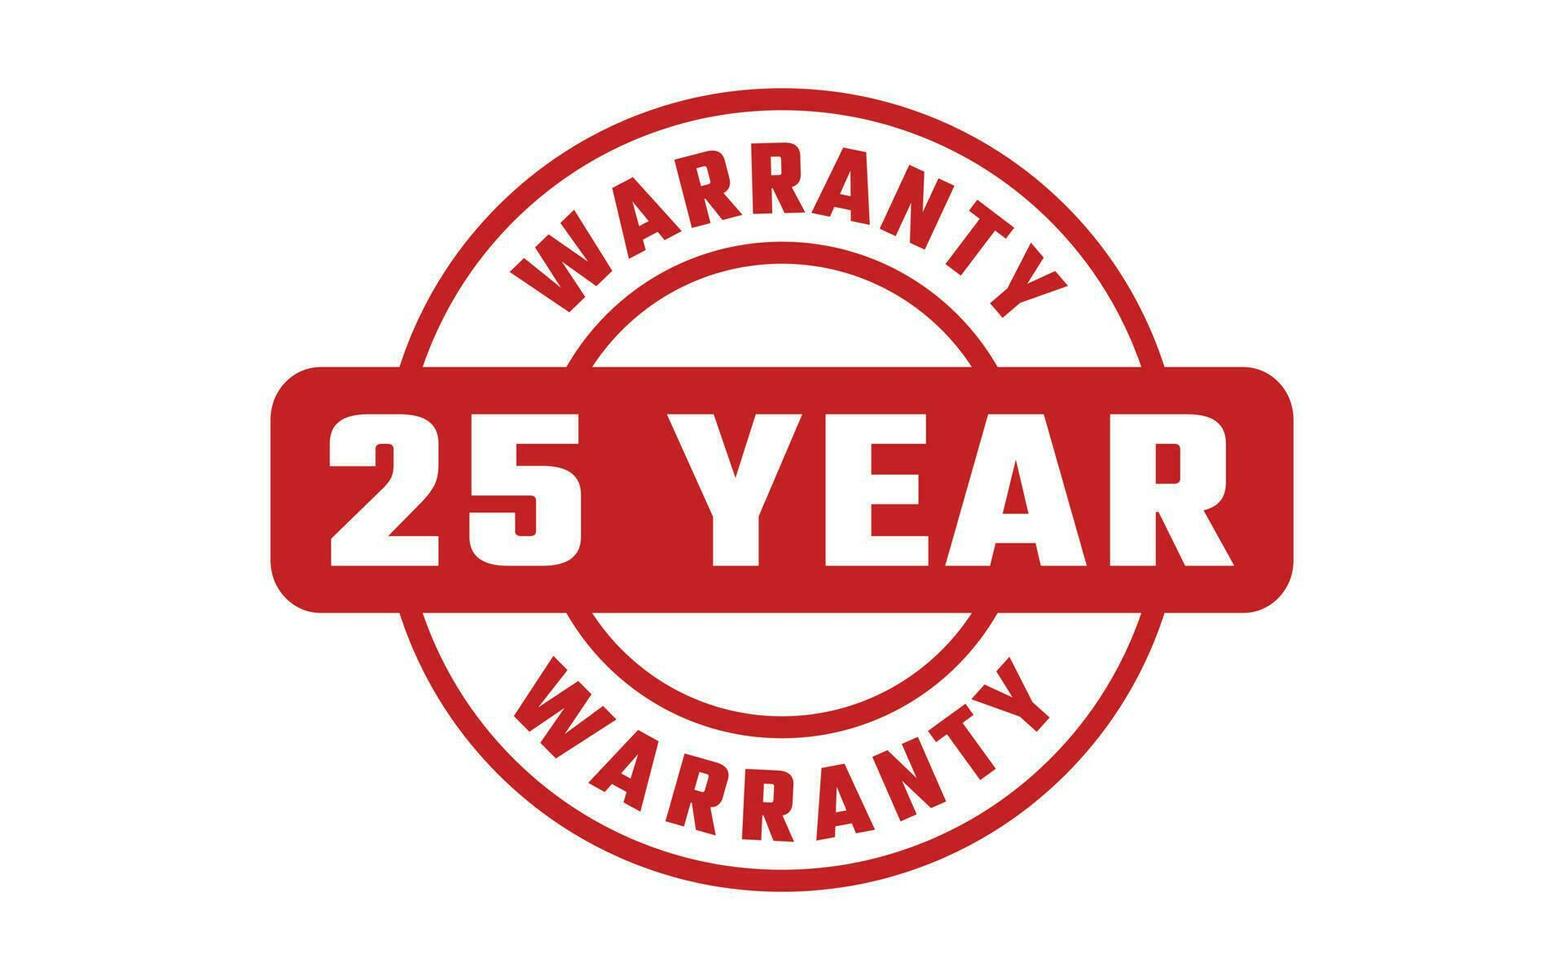 25 Year Warranty Rubber Stamp vector